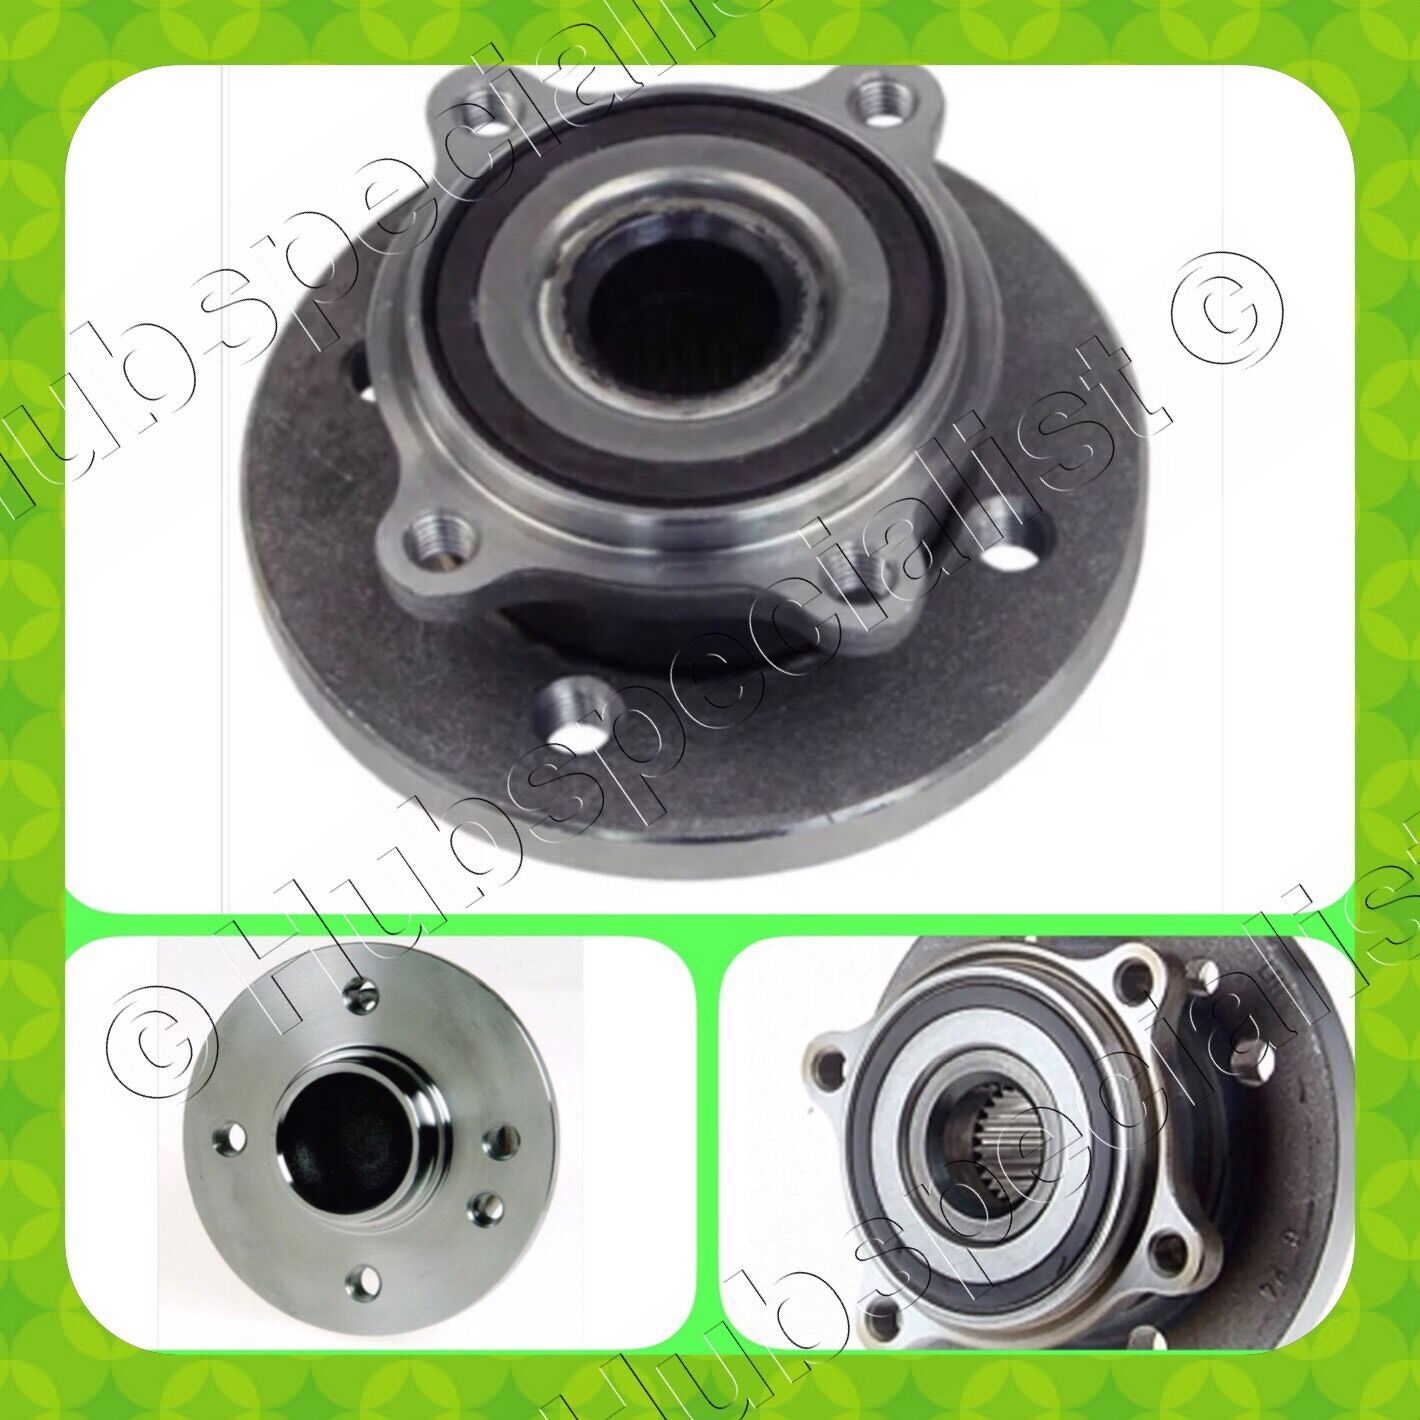 FRONT WHEEL HUB BEARING ASSEMBLY FOR 2007-2013 MINI COOPER   2-3 DAY RECEIVE